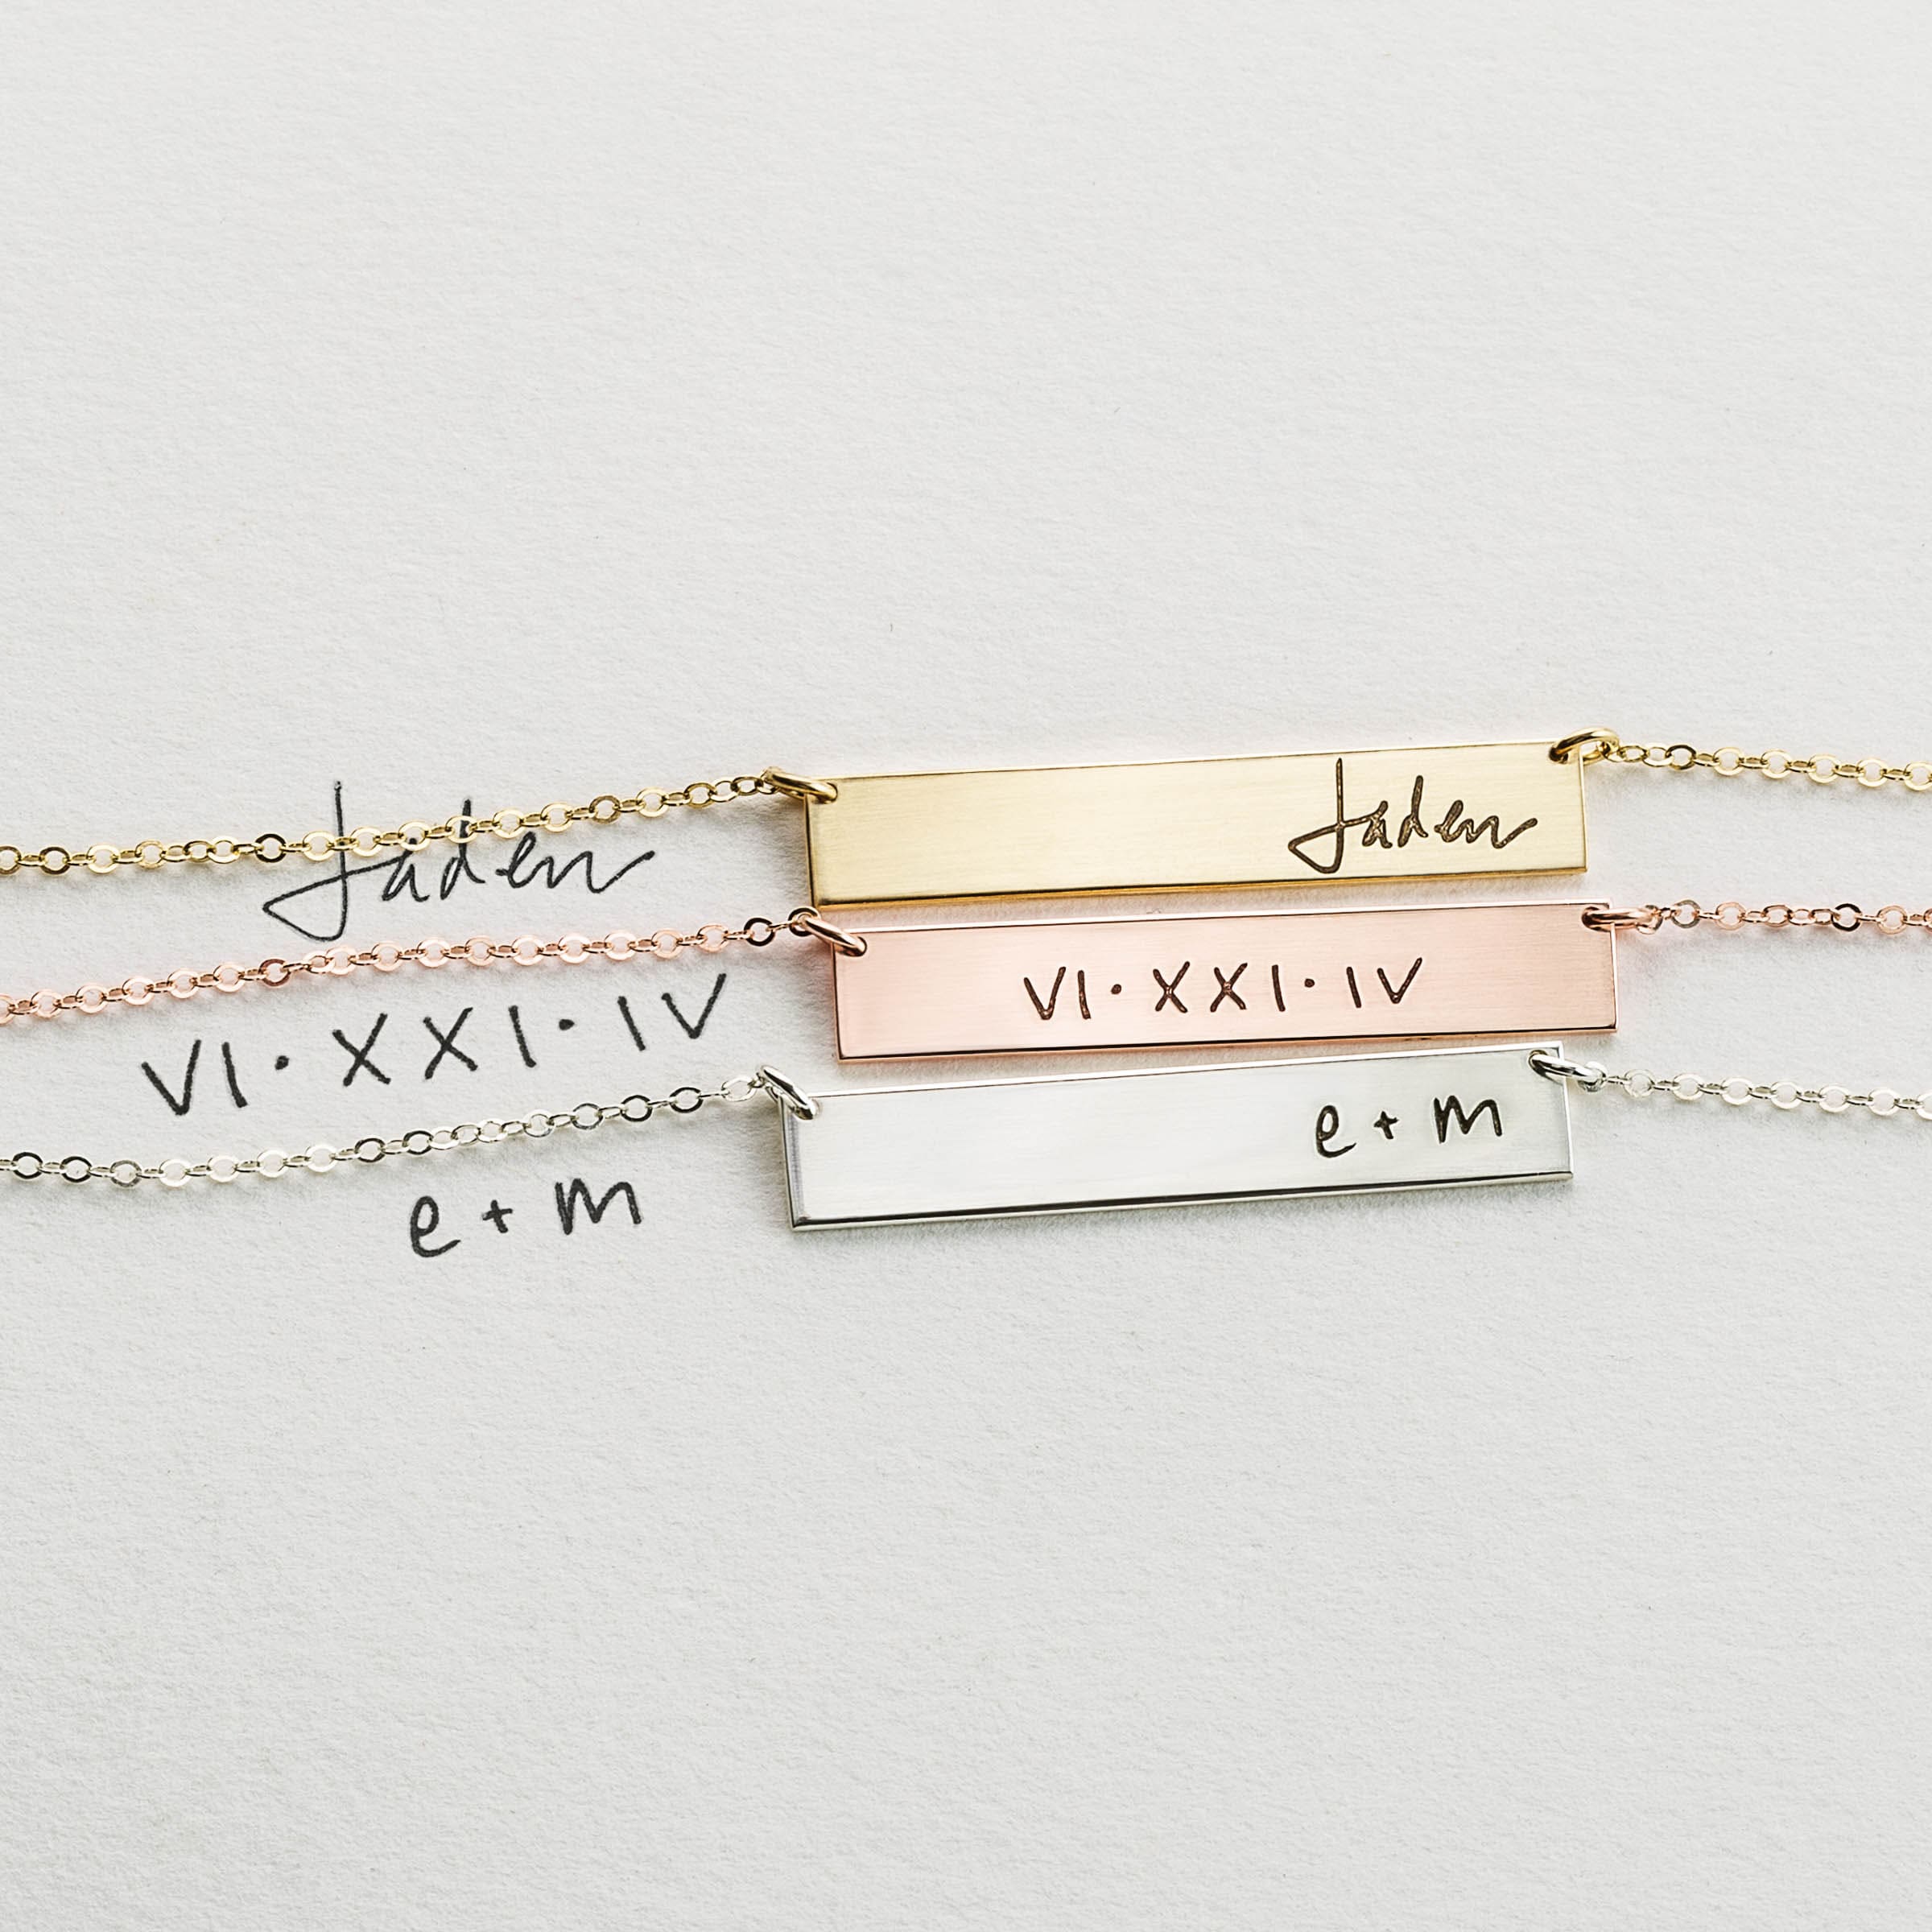 Gold Round Handwriting Custom Charm Bracelet Etched with Your Actual Handwriting on 5/8 Disc